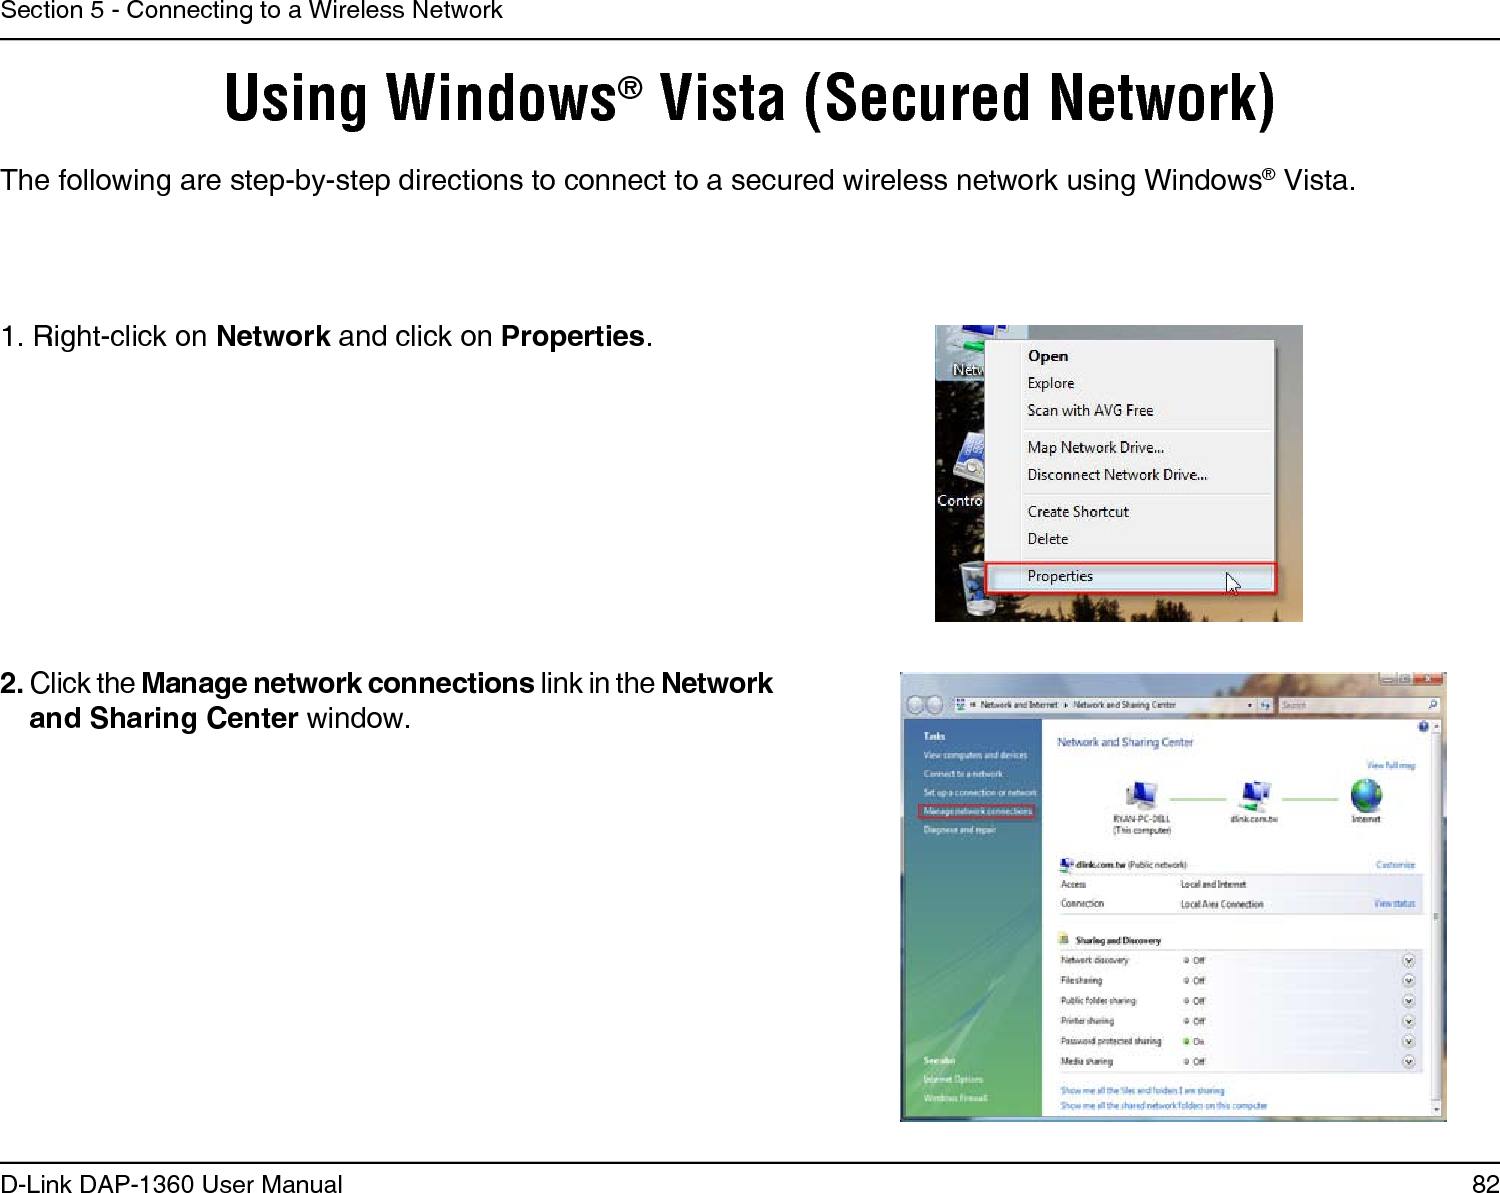 82D-Link DAP-1360 User ManualSection 5 - Connecting to a Wireless NetworkUsing Windows® Vista (Secured Network)The following are step-by-step directions to connect to a secured wireless network using Windows® Vista.2. Click the Manage network connections link in the Network and Sharing Center window. 1. Right-click on Network and click on Properties.     